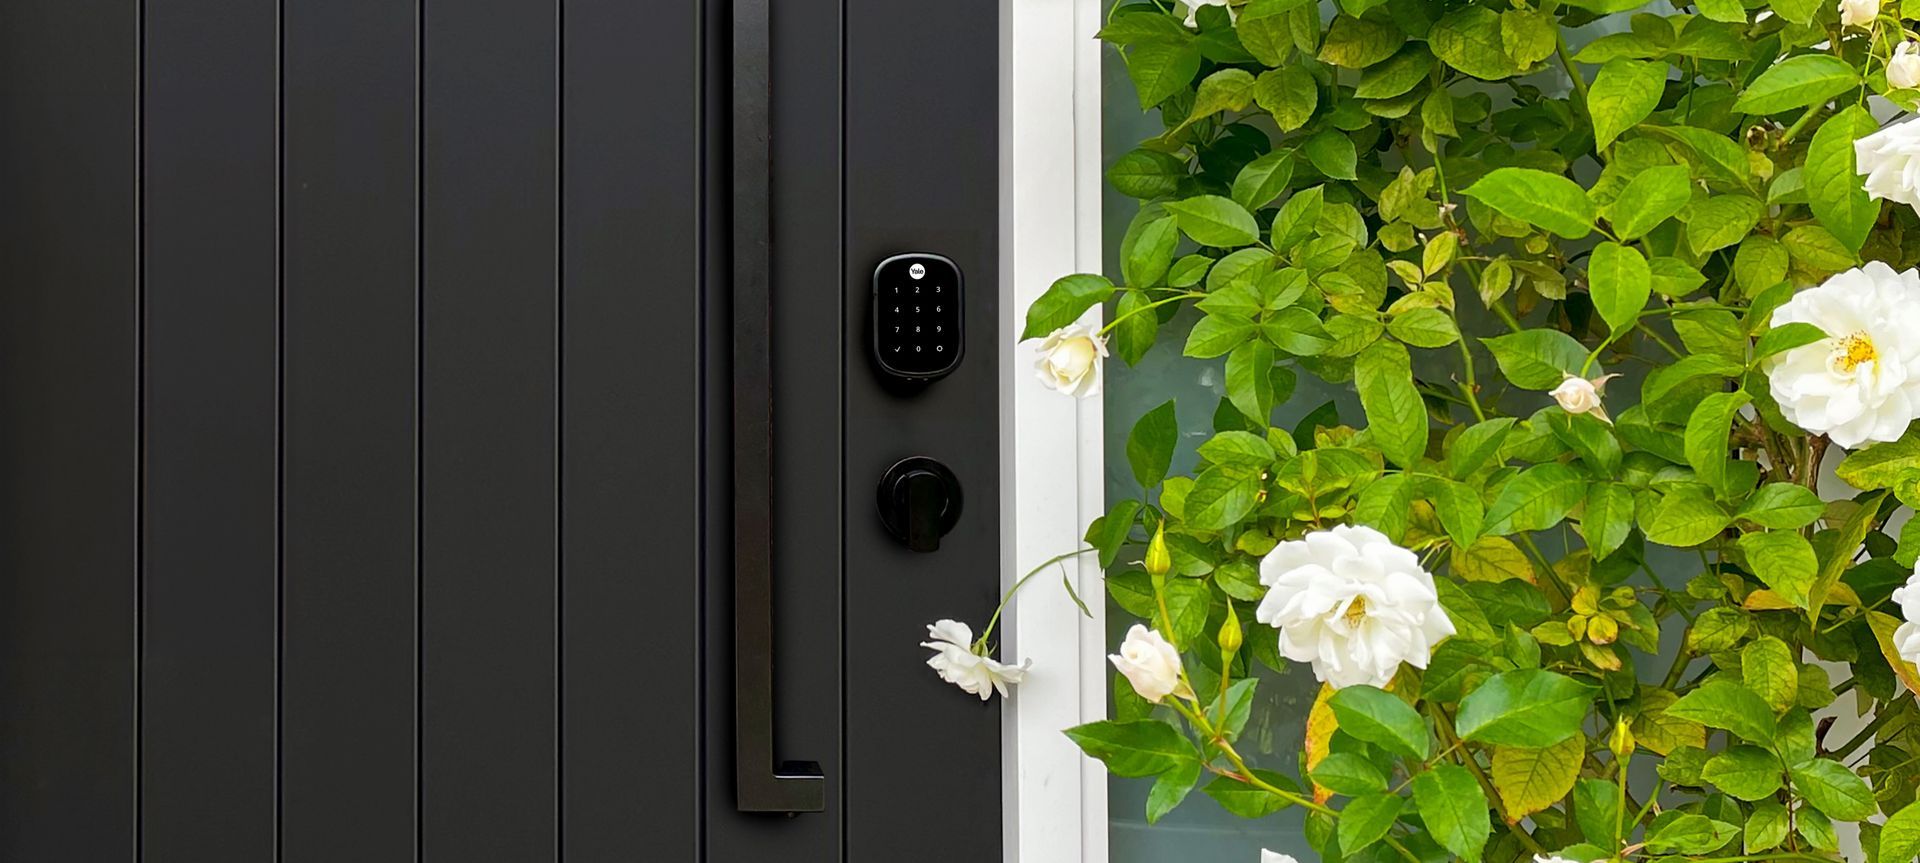 PIN code entry combined with the Yale Home app provides security and peace of mind. Image credit: ASSA ABLOY